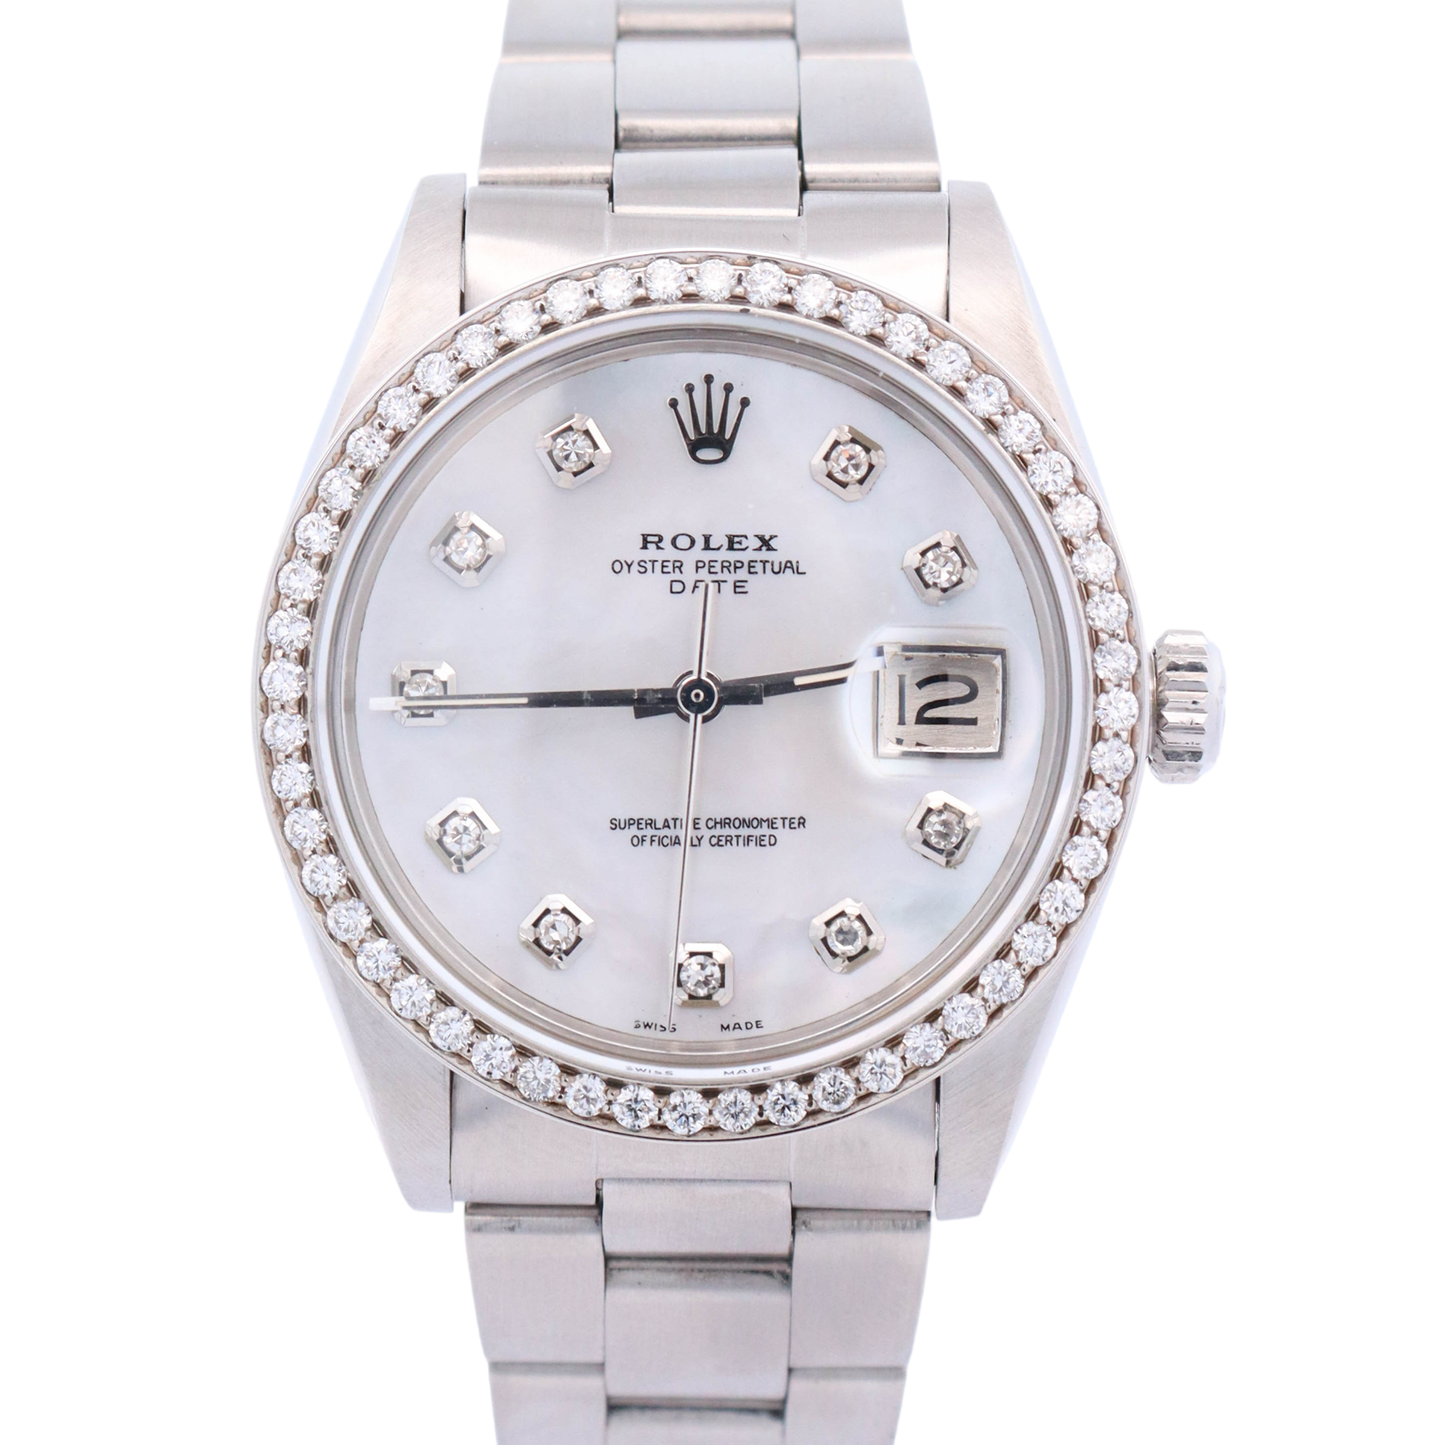 Rolex Oyster Perpetual Date 34mm Stainless Steel Custom White MOP Diamond Dial Watch Reference# 1501